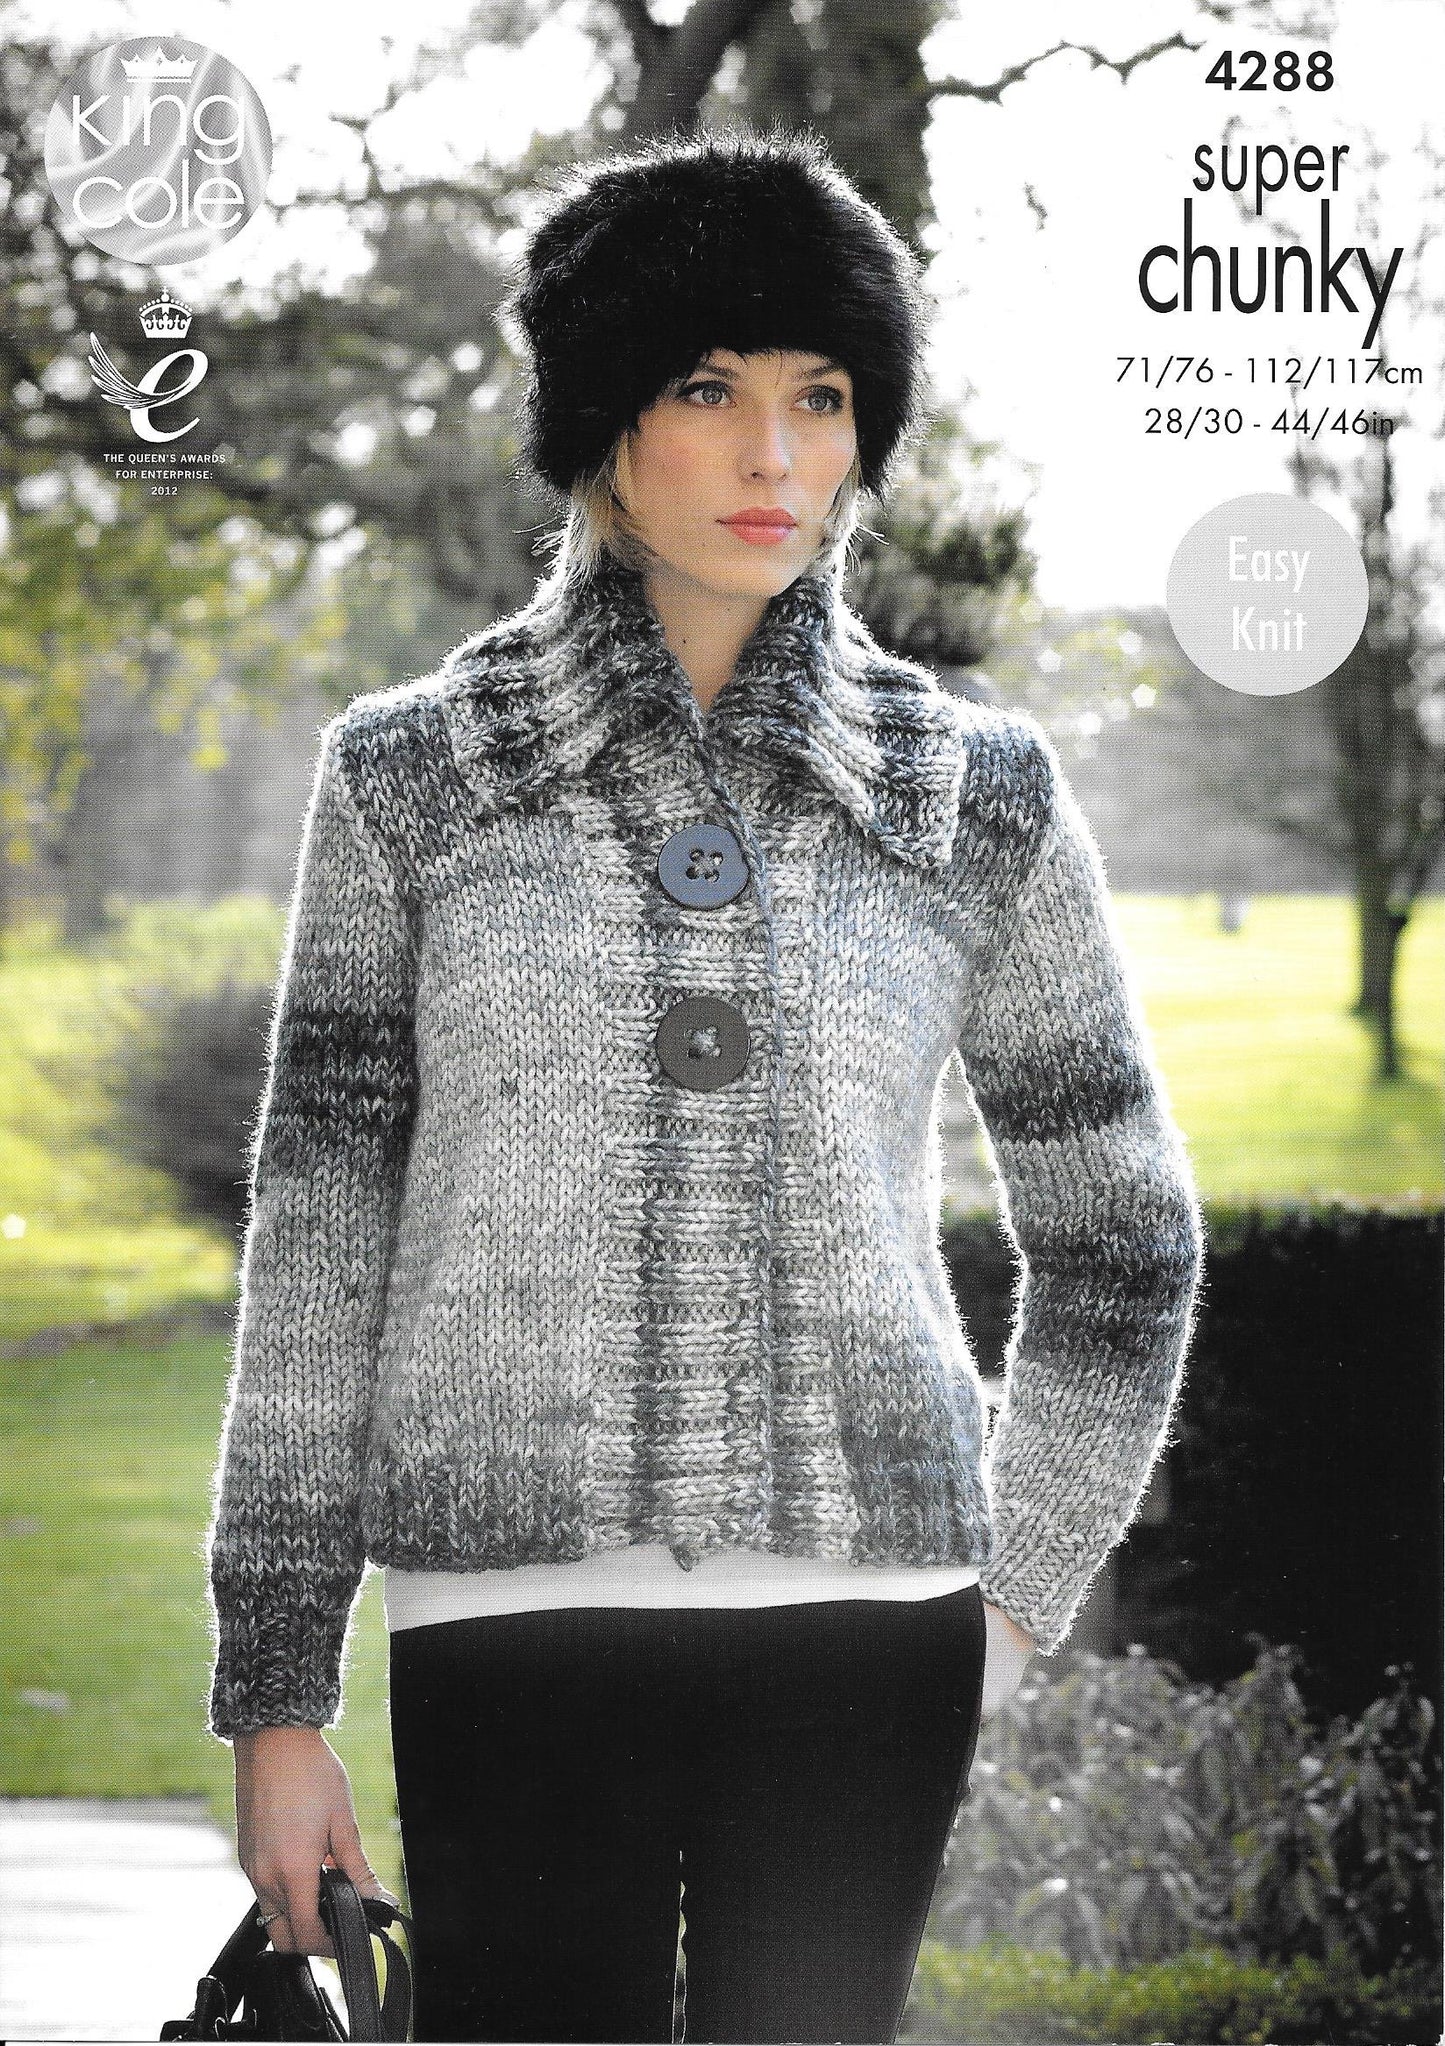 4288 King Cole big Value Super Chunky Tints ladies cardigan and sweater knitting pattern